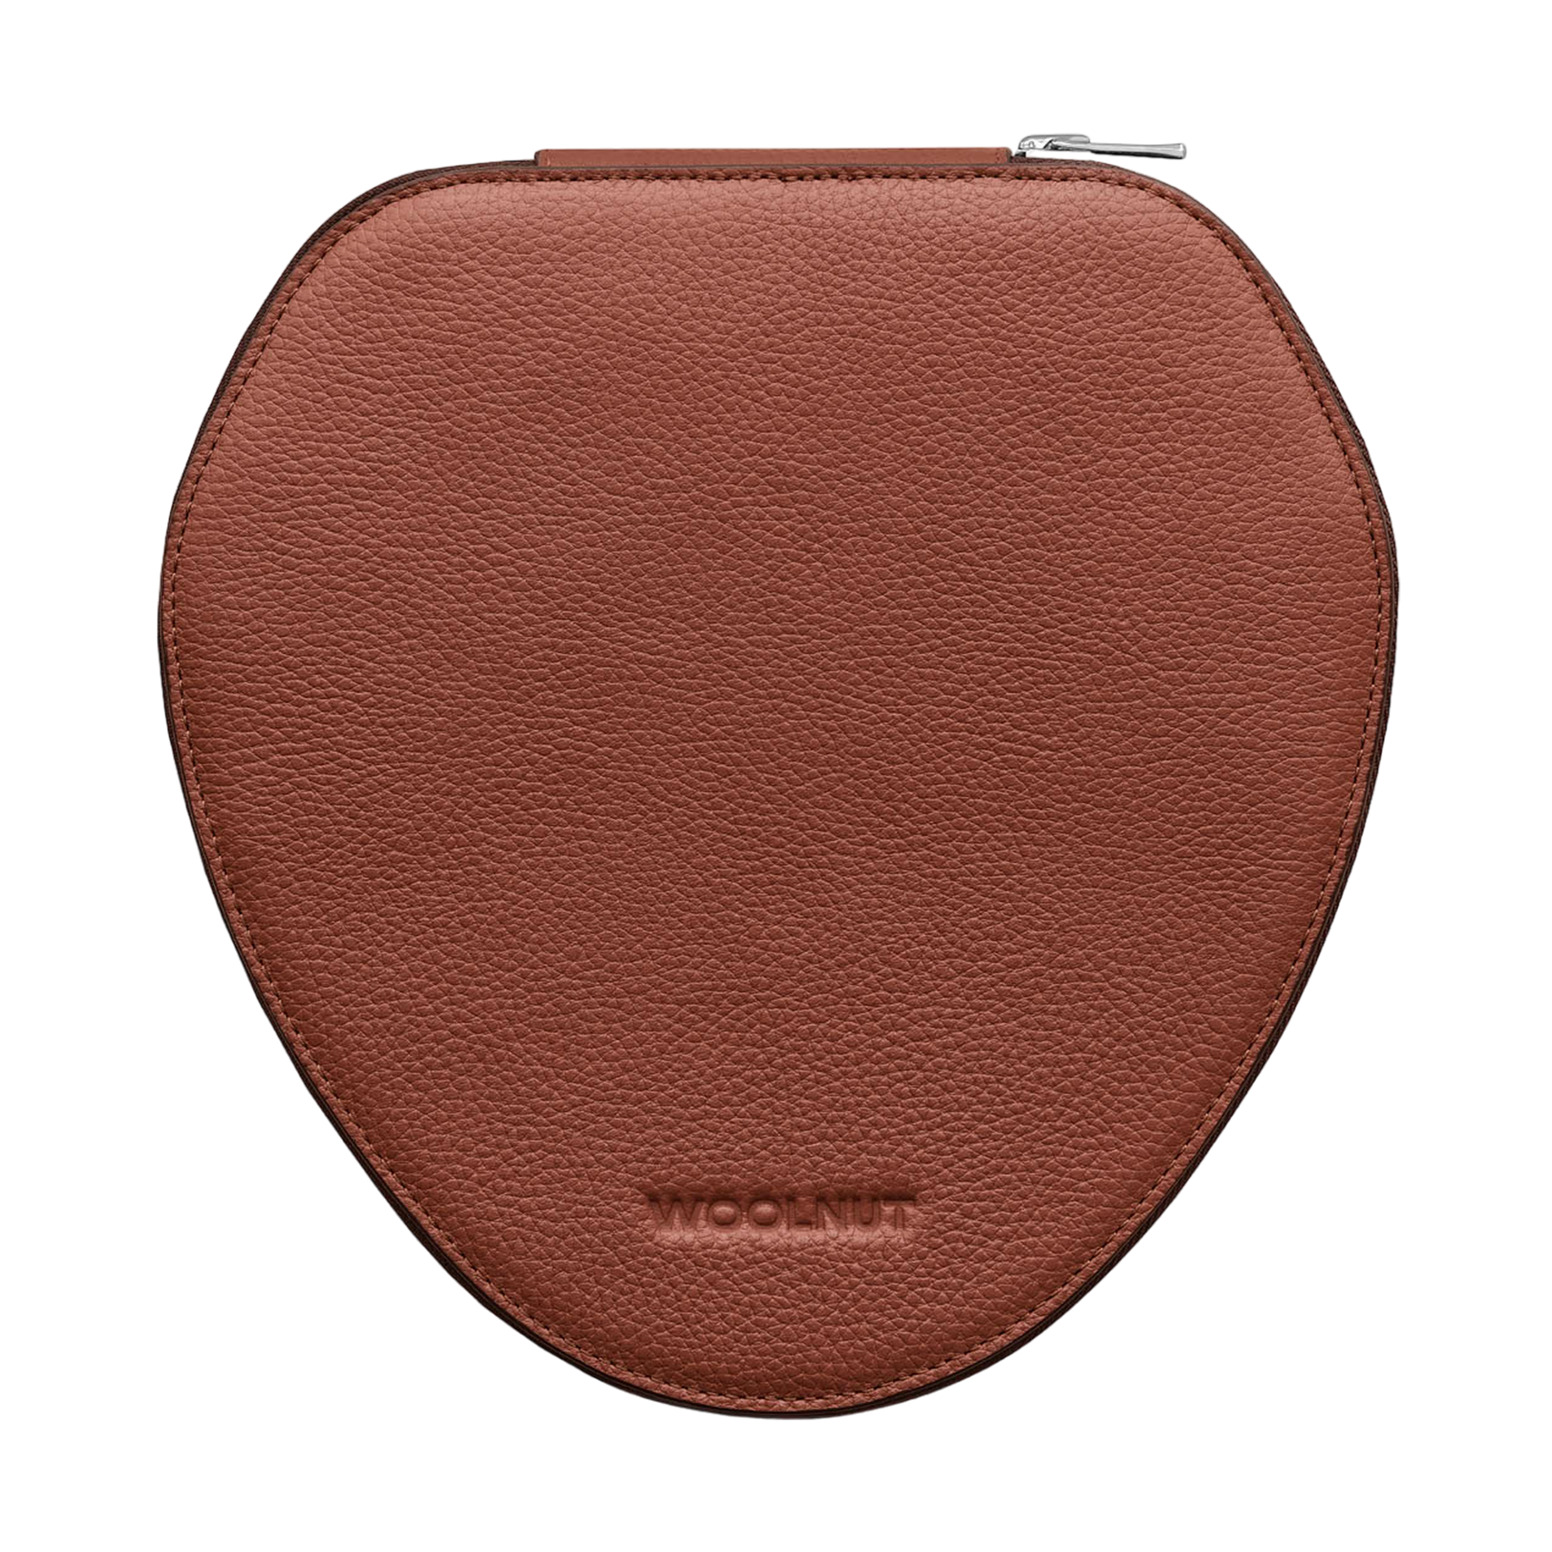 WOOLNUT Leather Case for AirPods Max - Cognac